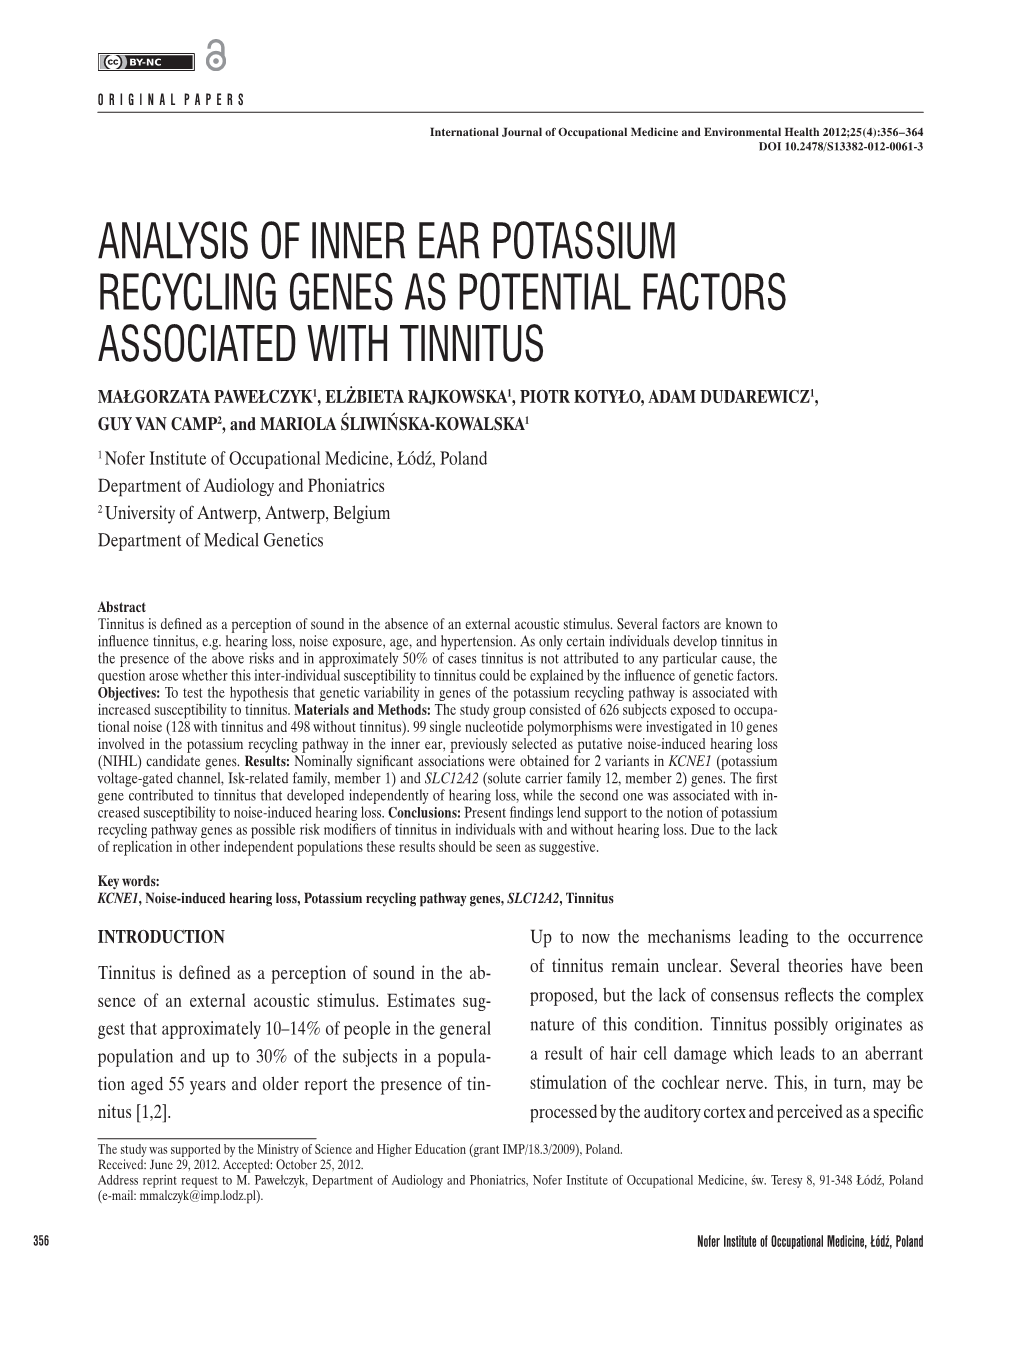 Analysis of Inner Ear Potassium Recycling Genes As Potential Factors